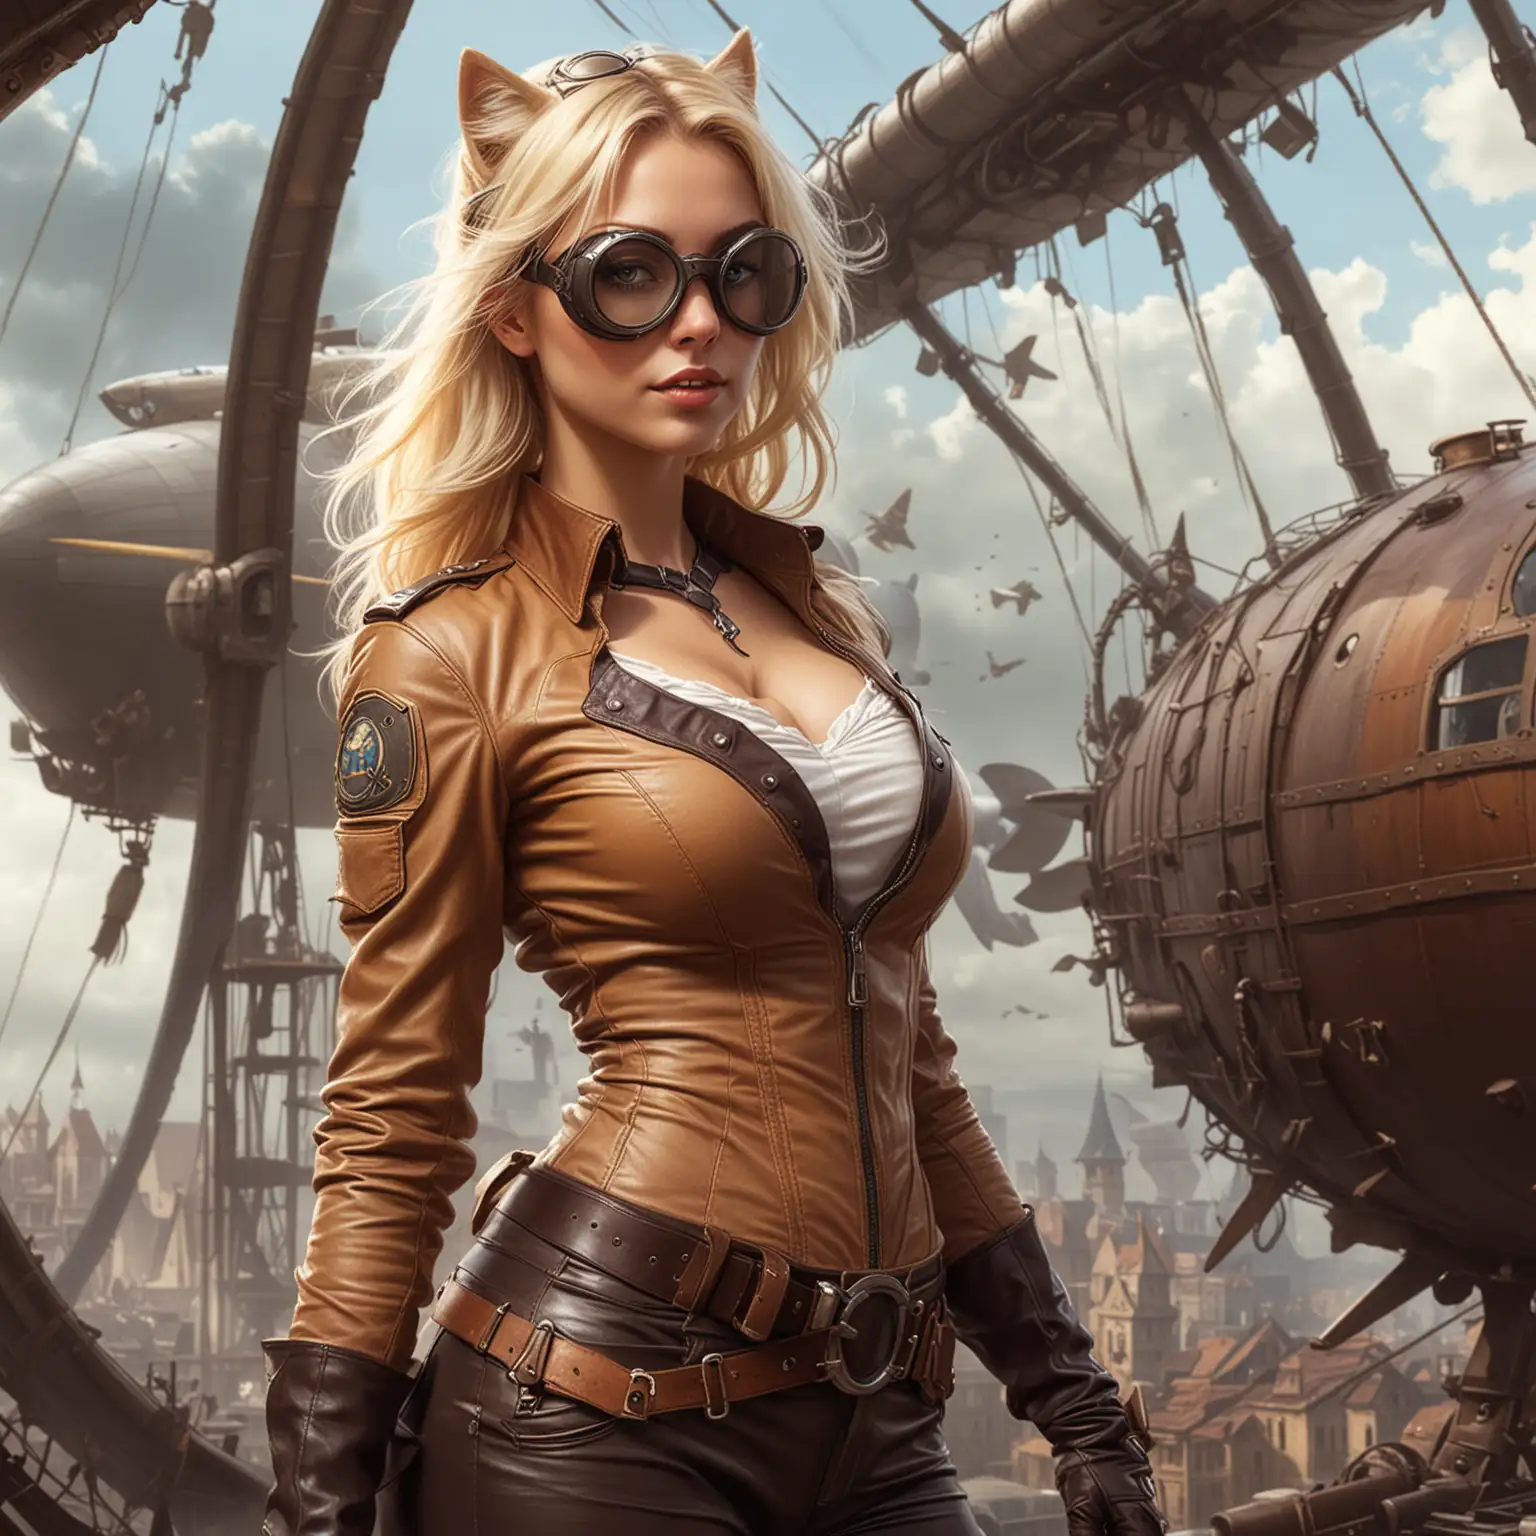 Blonde Catgirl Pilot in Medieval Steampunk Outfit with Arcane Airship